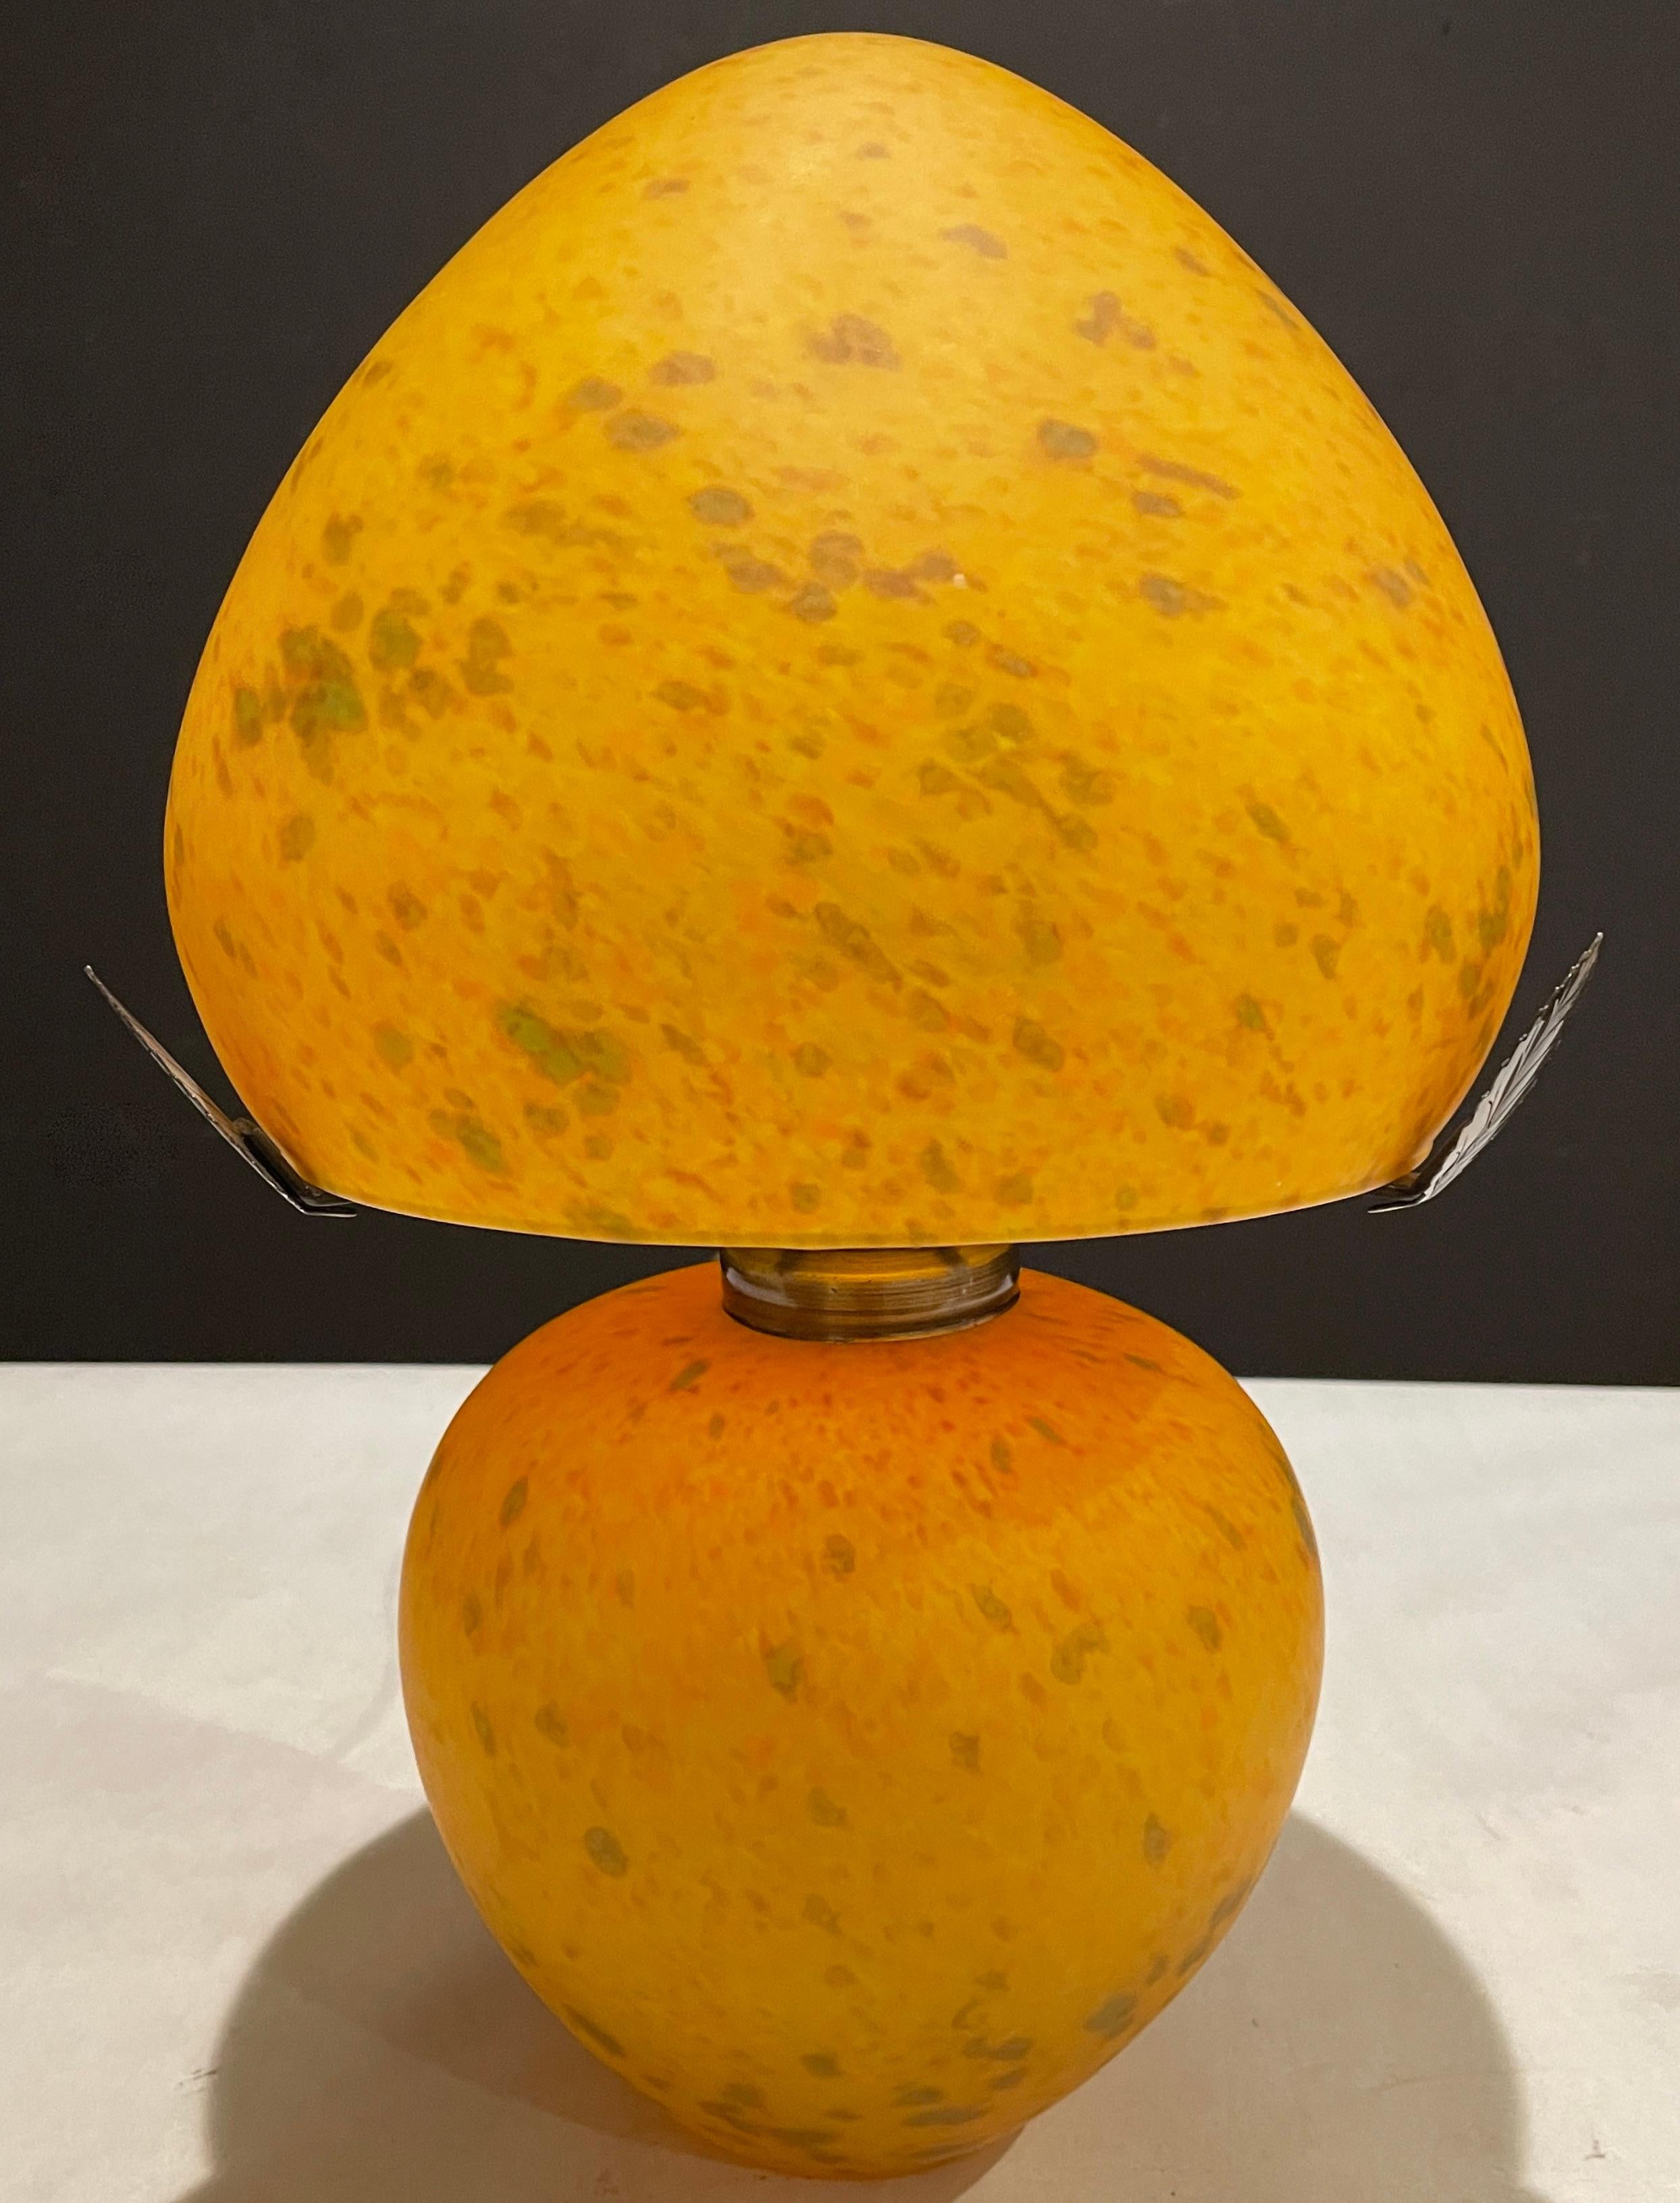 Mottled orange mouth blown art glass lamp and shade. Original makers label affixed to shade. French maker.